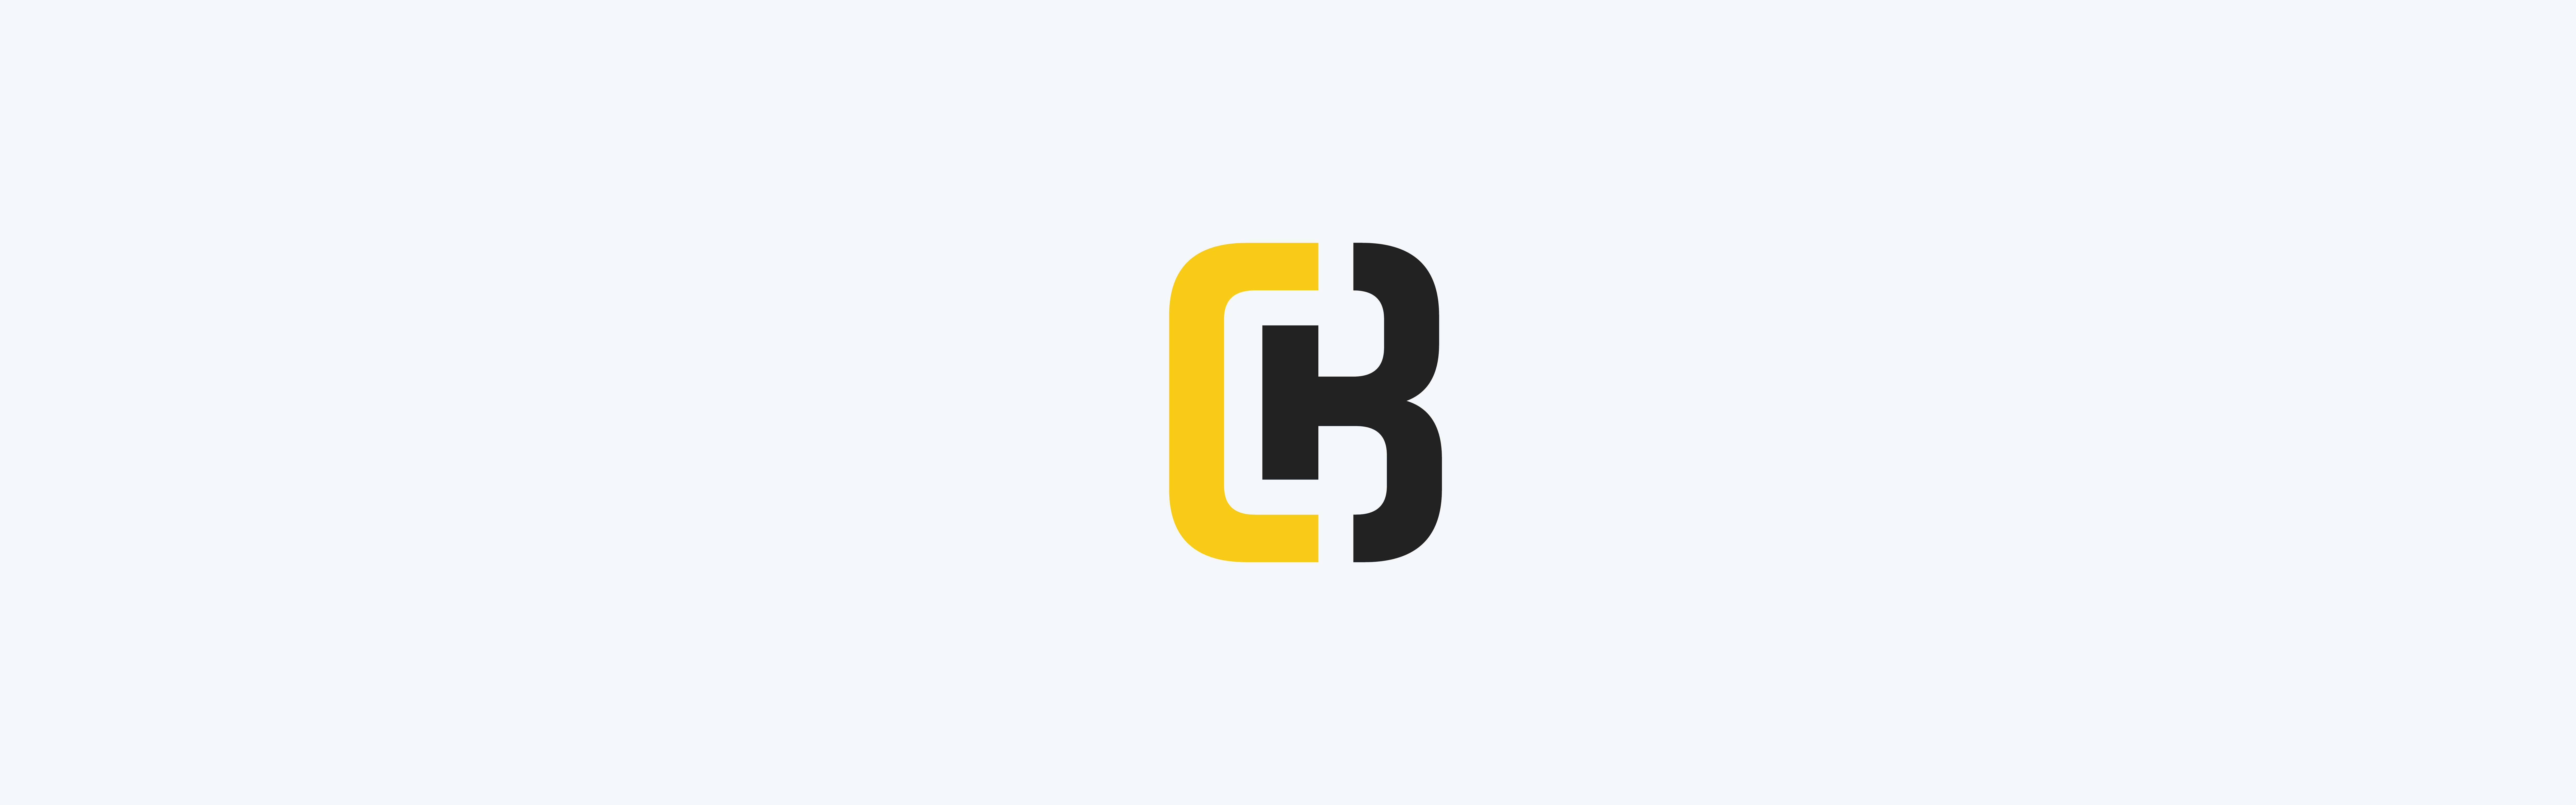 The image displays a stylized logo consisting of a black letter 'b' overlaid on a bright yellow and white background, forming an interconnected design that could represent Bright Lighting's brand or company initials.